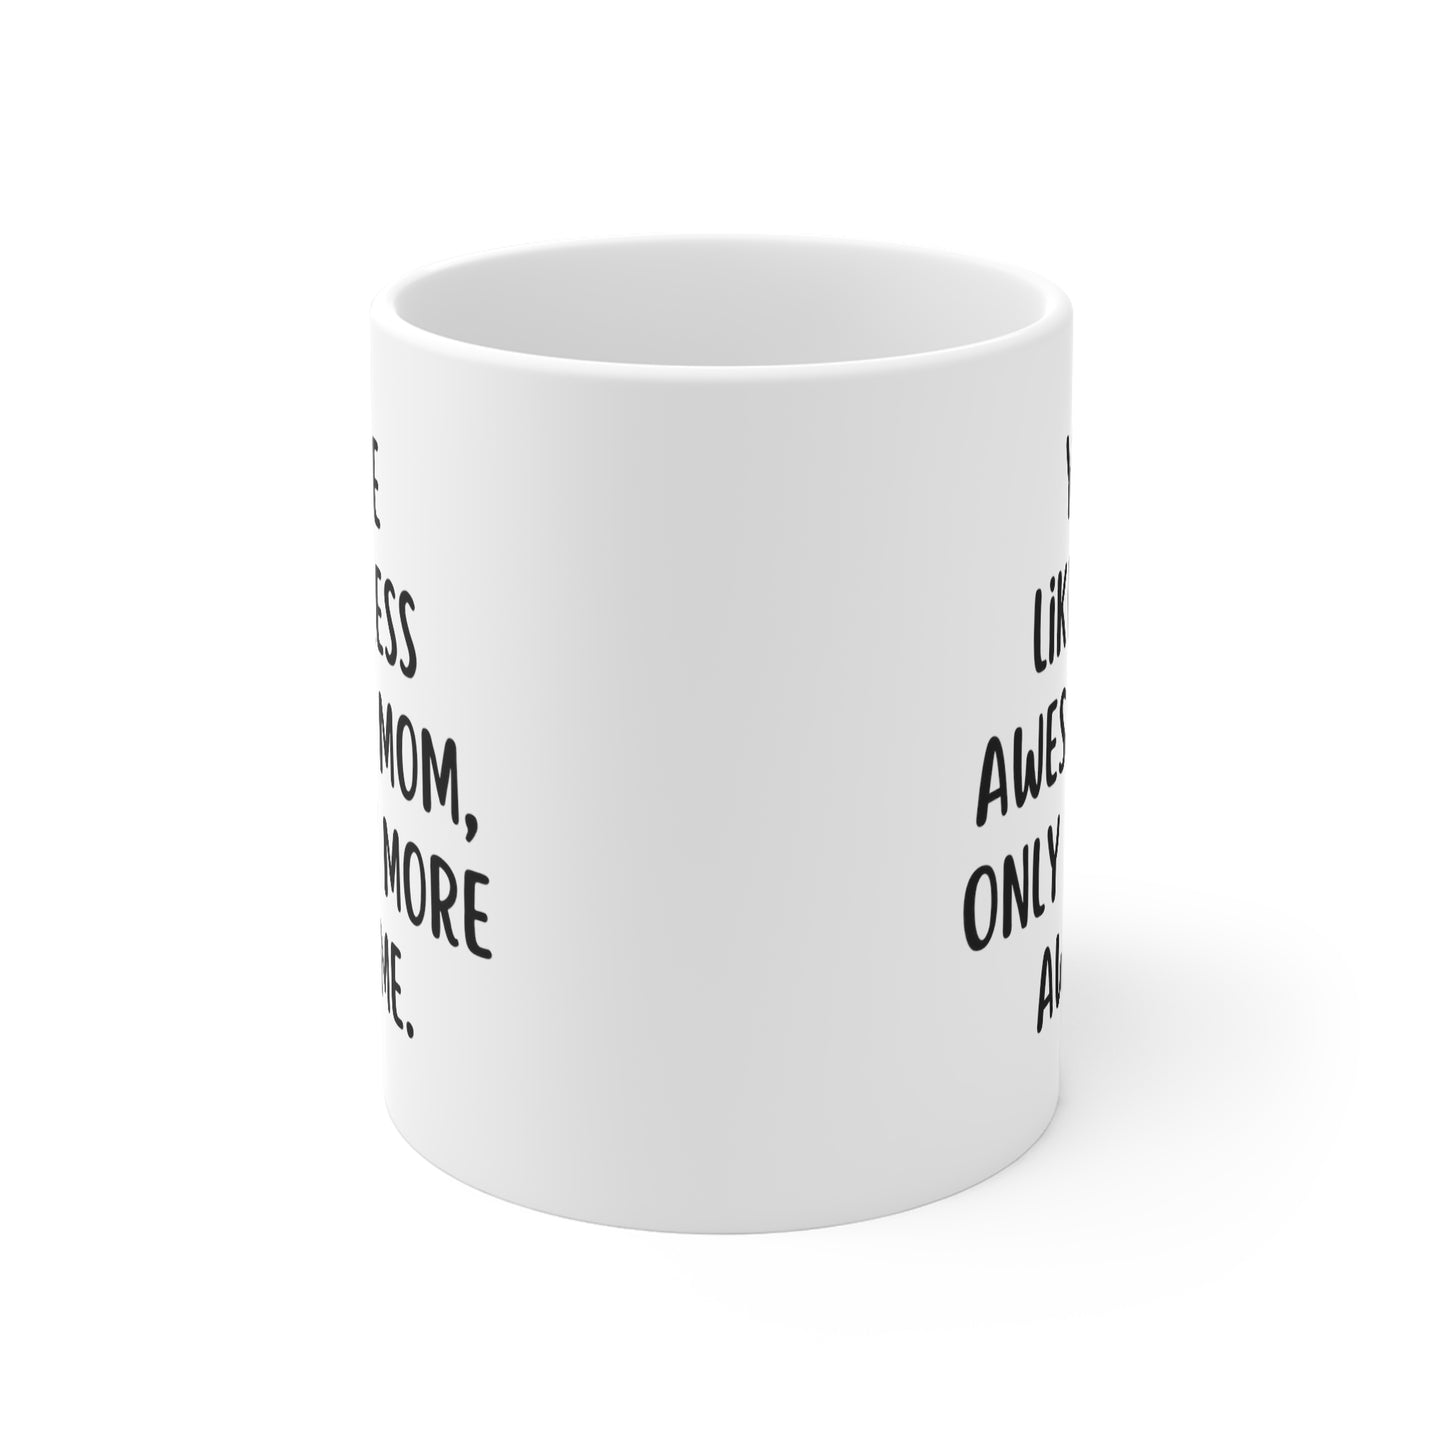 You're Like A Less Awesome Mom, Only Way More Awesome | Funny, Snarky Gift | White Ceramic Mug, Fun Block Font